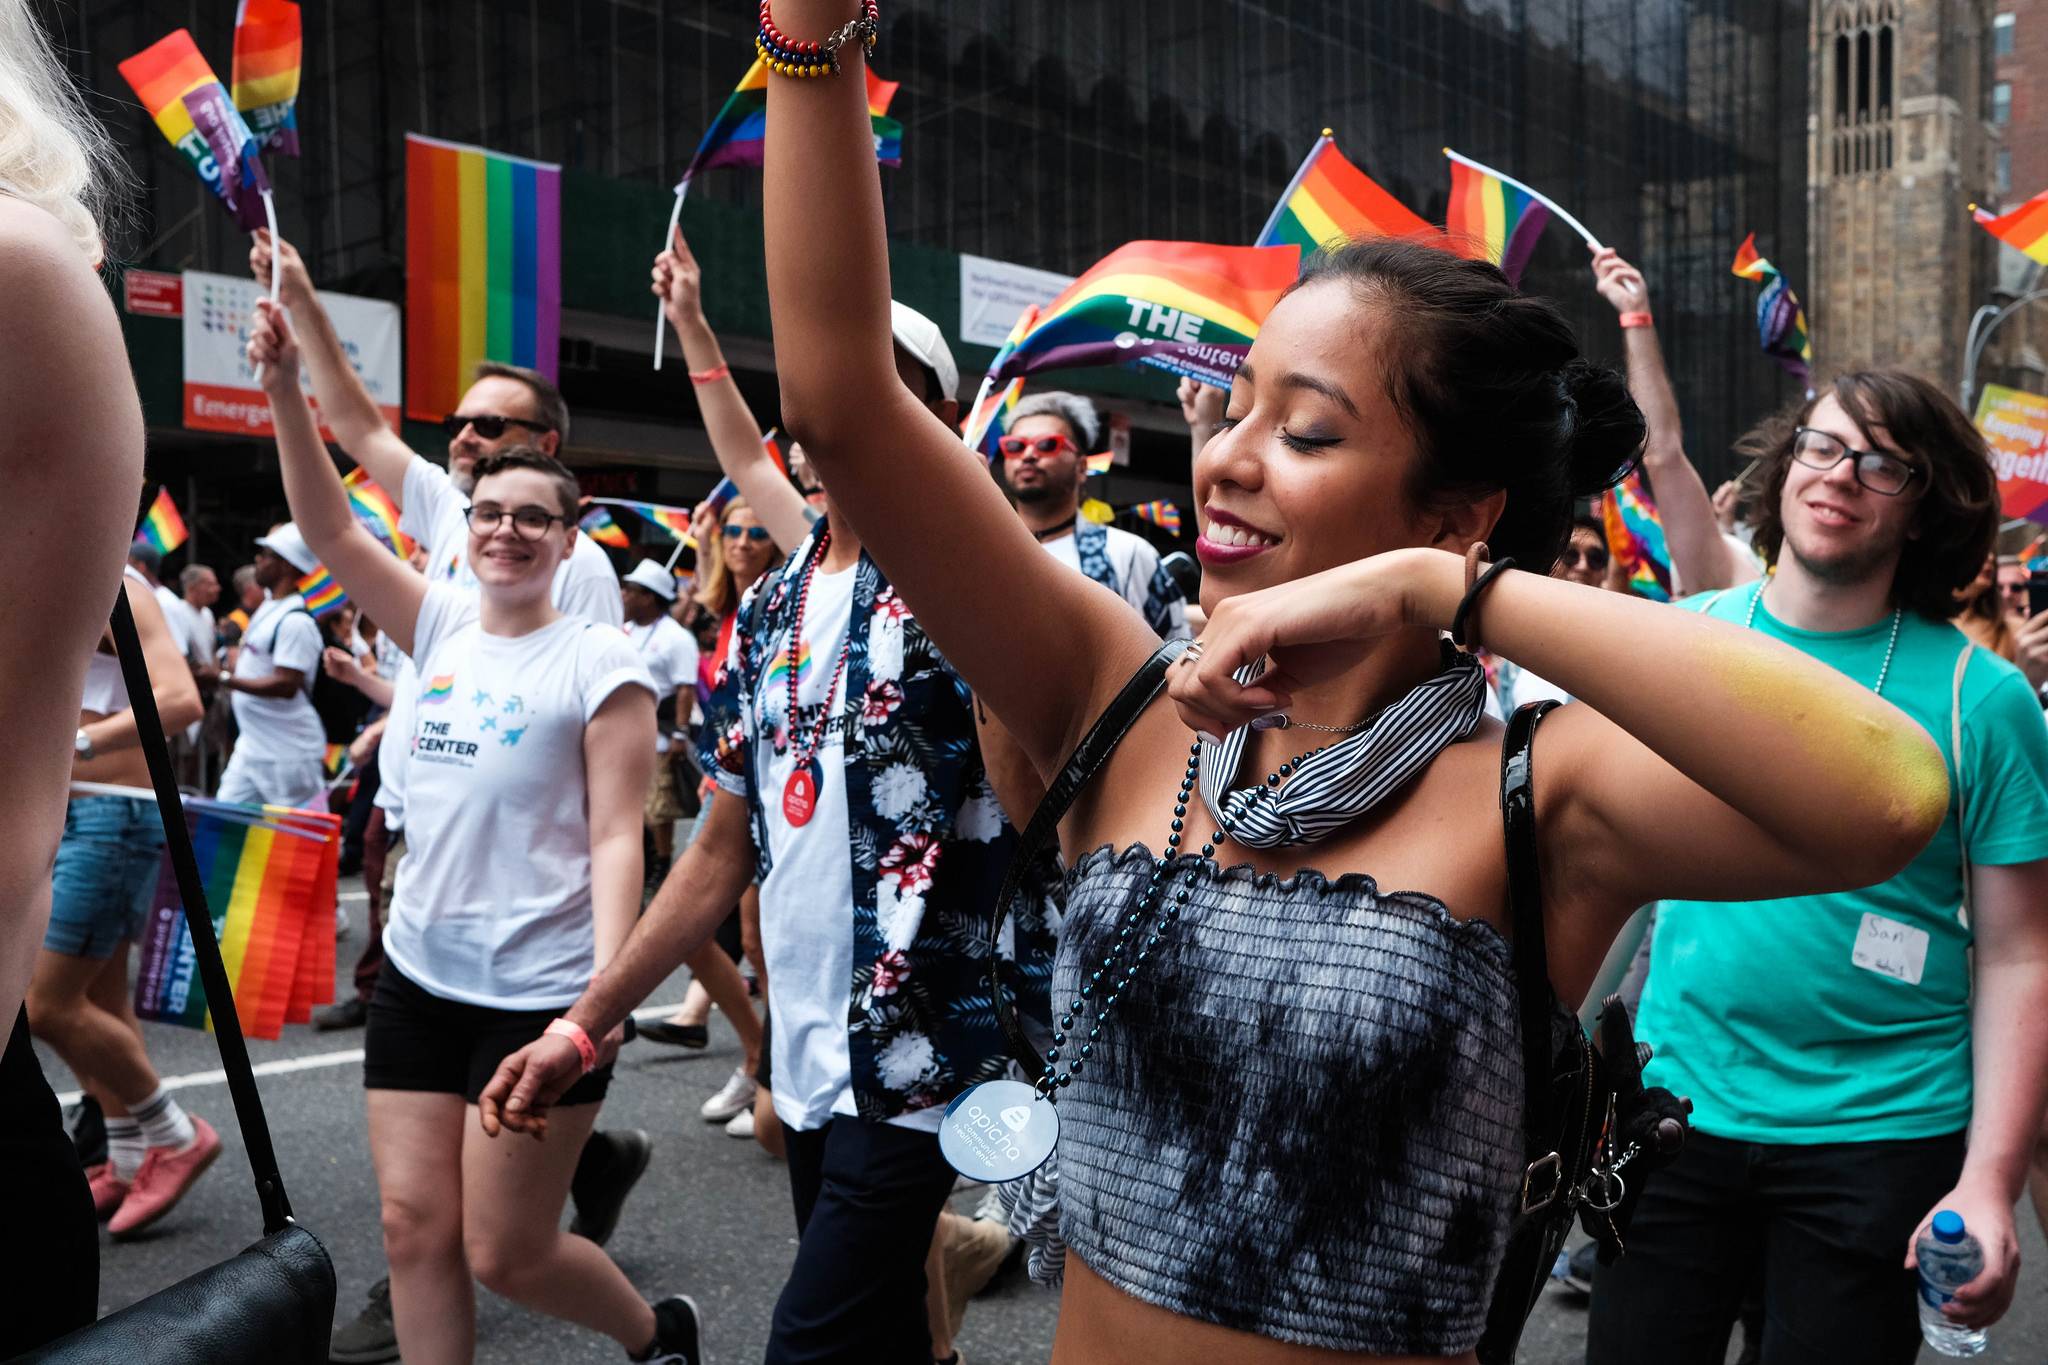 LGBTQ Americans want Pride to be more intersectional